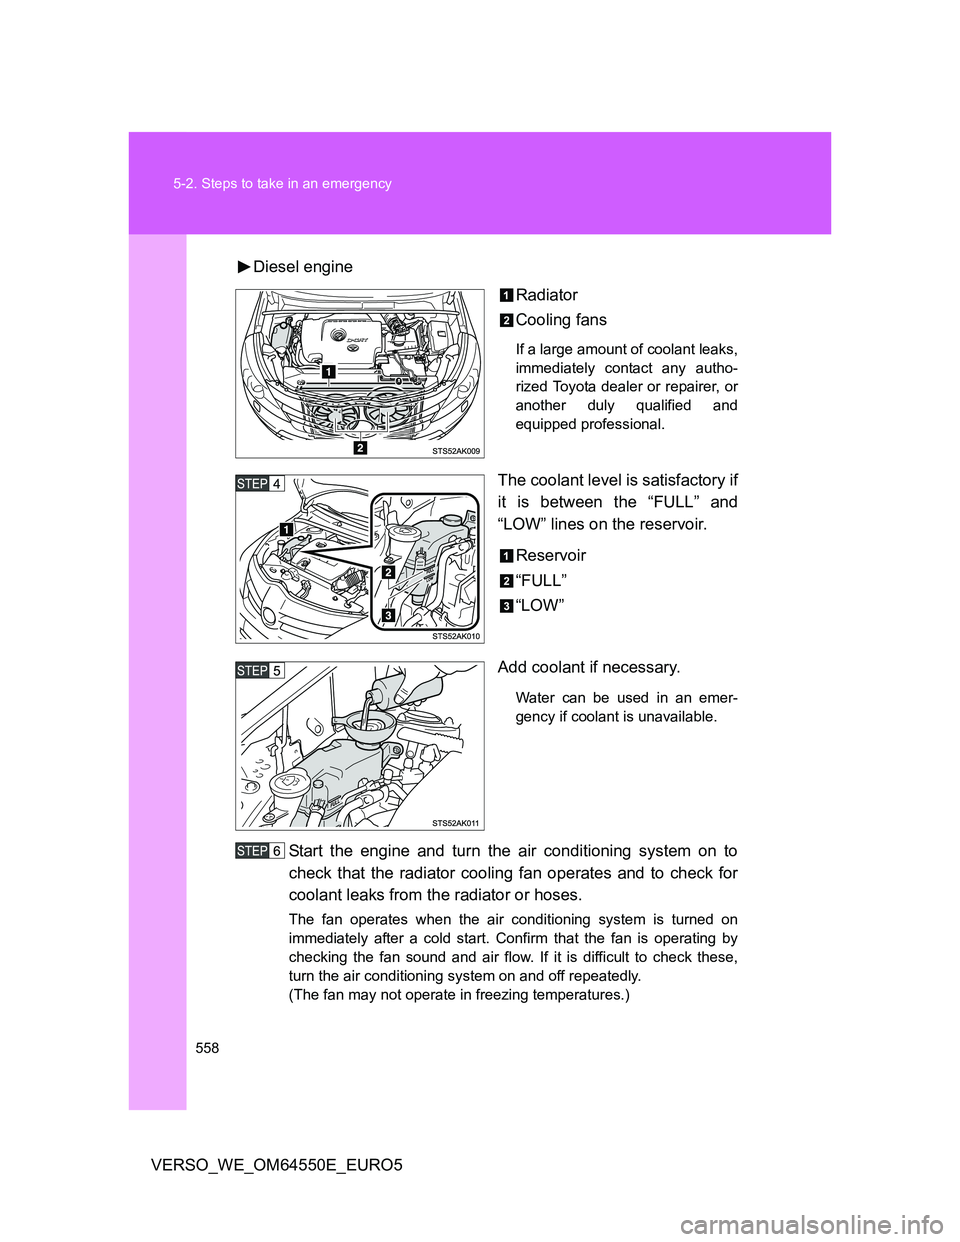 TOYOTA VERSO 2013  Owners Manual 558 5-2. Steps to take in an emergency
VERSO_WE_OM64550E_EURO5Diesel engine
Radiator
Cooling fans
If a large amount of coolant leaks,
immediately contact any autho-
rized Toyota dealer or repairer, or